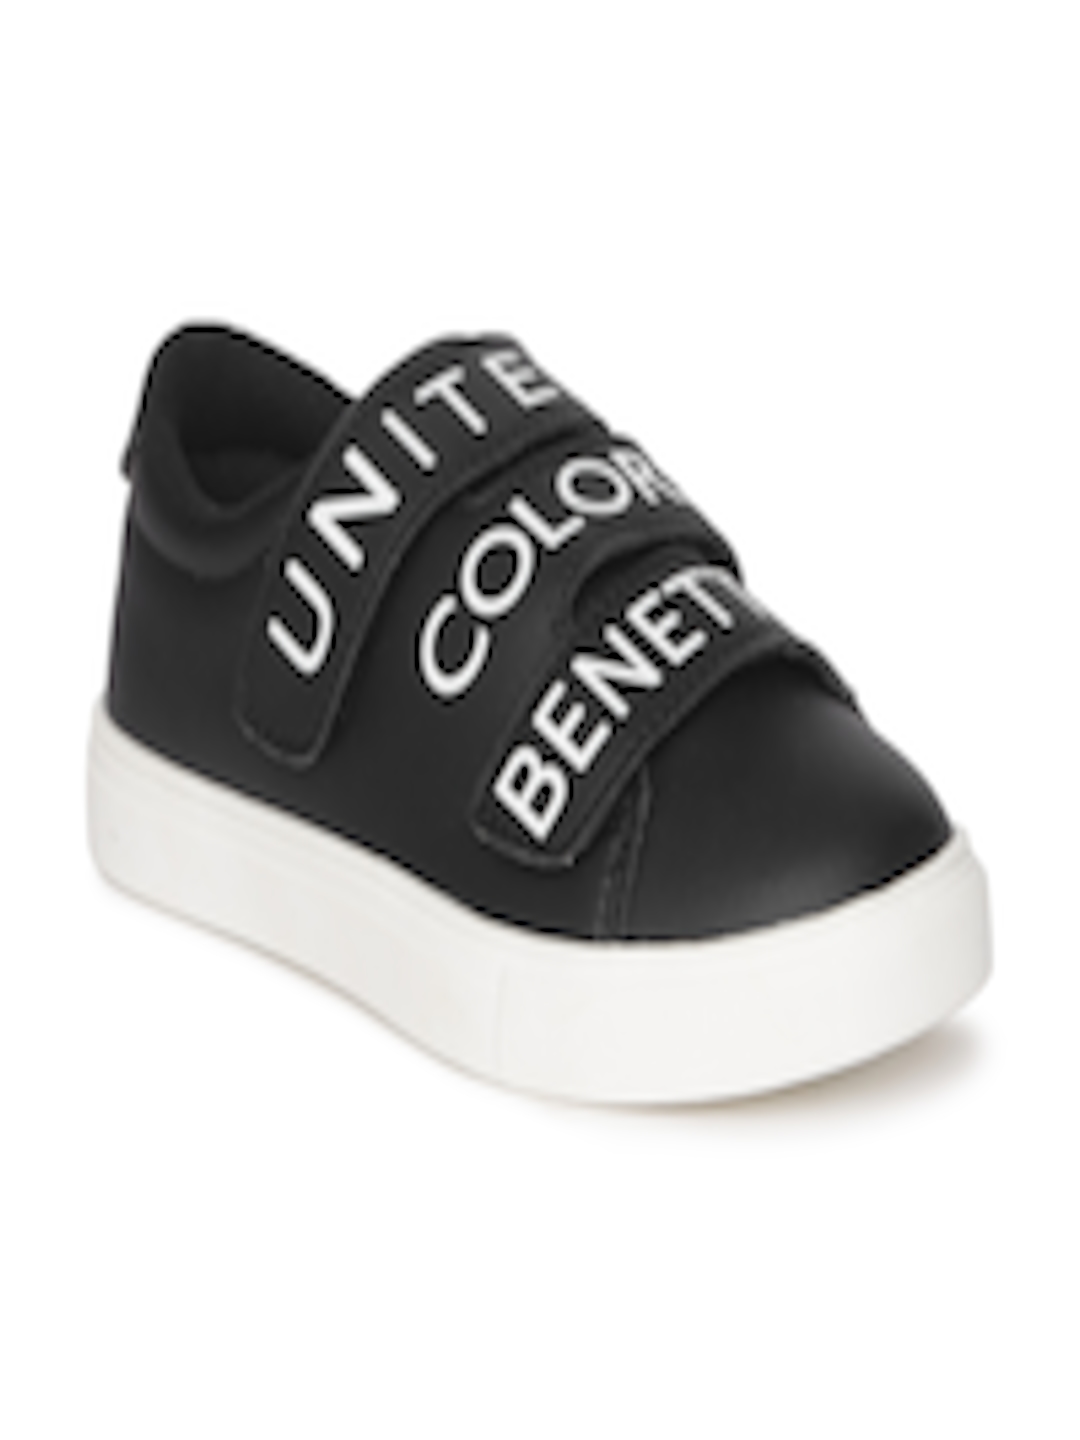 Buy United Colors Of Benetton Kids Black Sneakers - Casual Shoes for ...